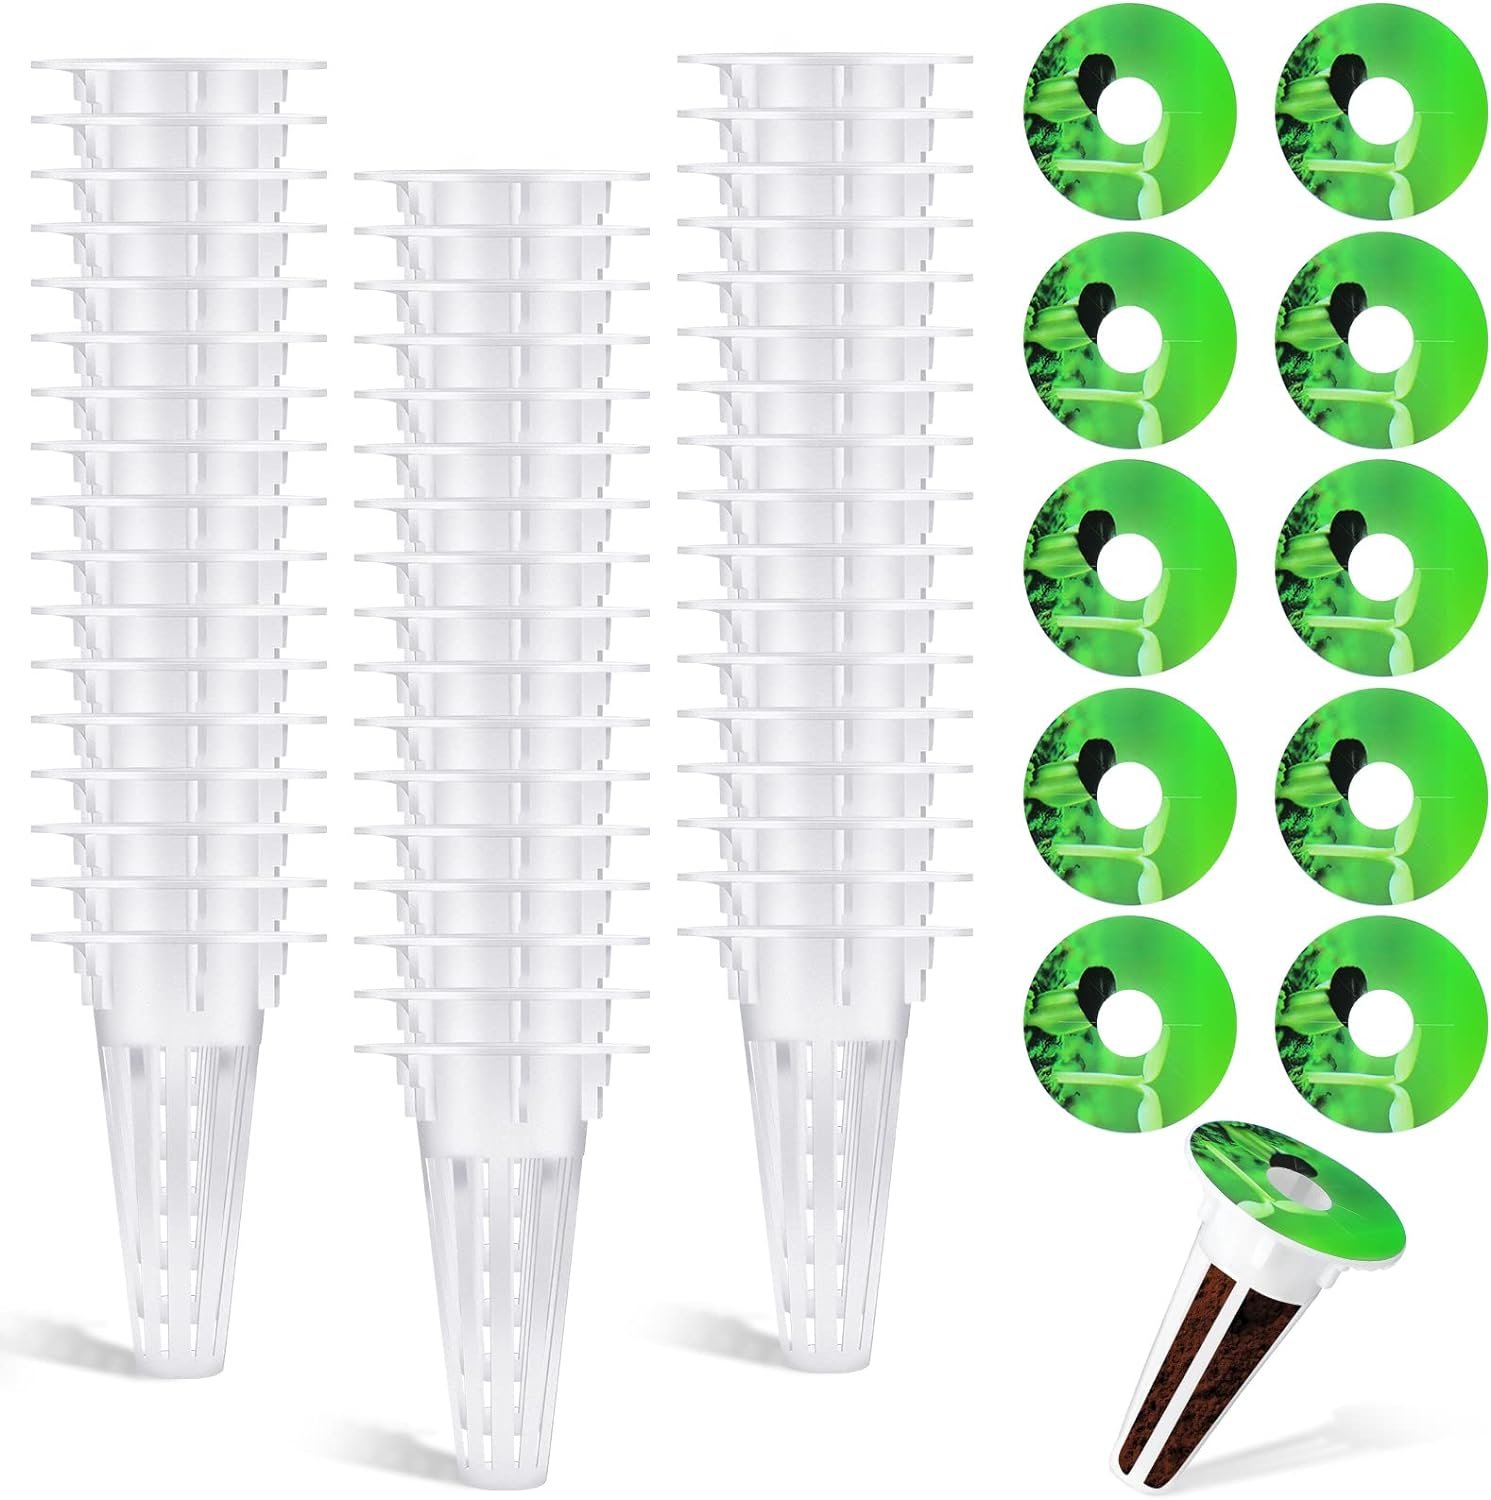 100 Pcs Hydroponic Growing Kit Include 50 Pcs Hydroponic Plant Replacement Basket Plant Growing Containers and 50 Pcs Seed Pot Label Compatible with Hydroponic Growing System (White)